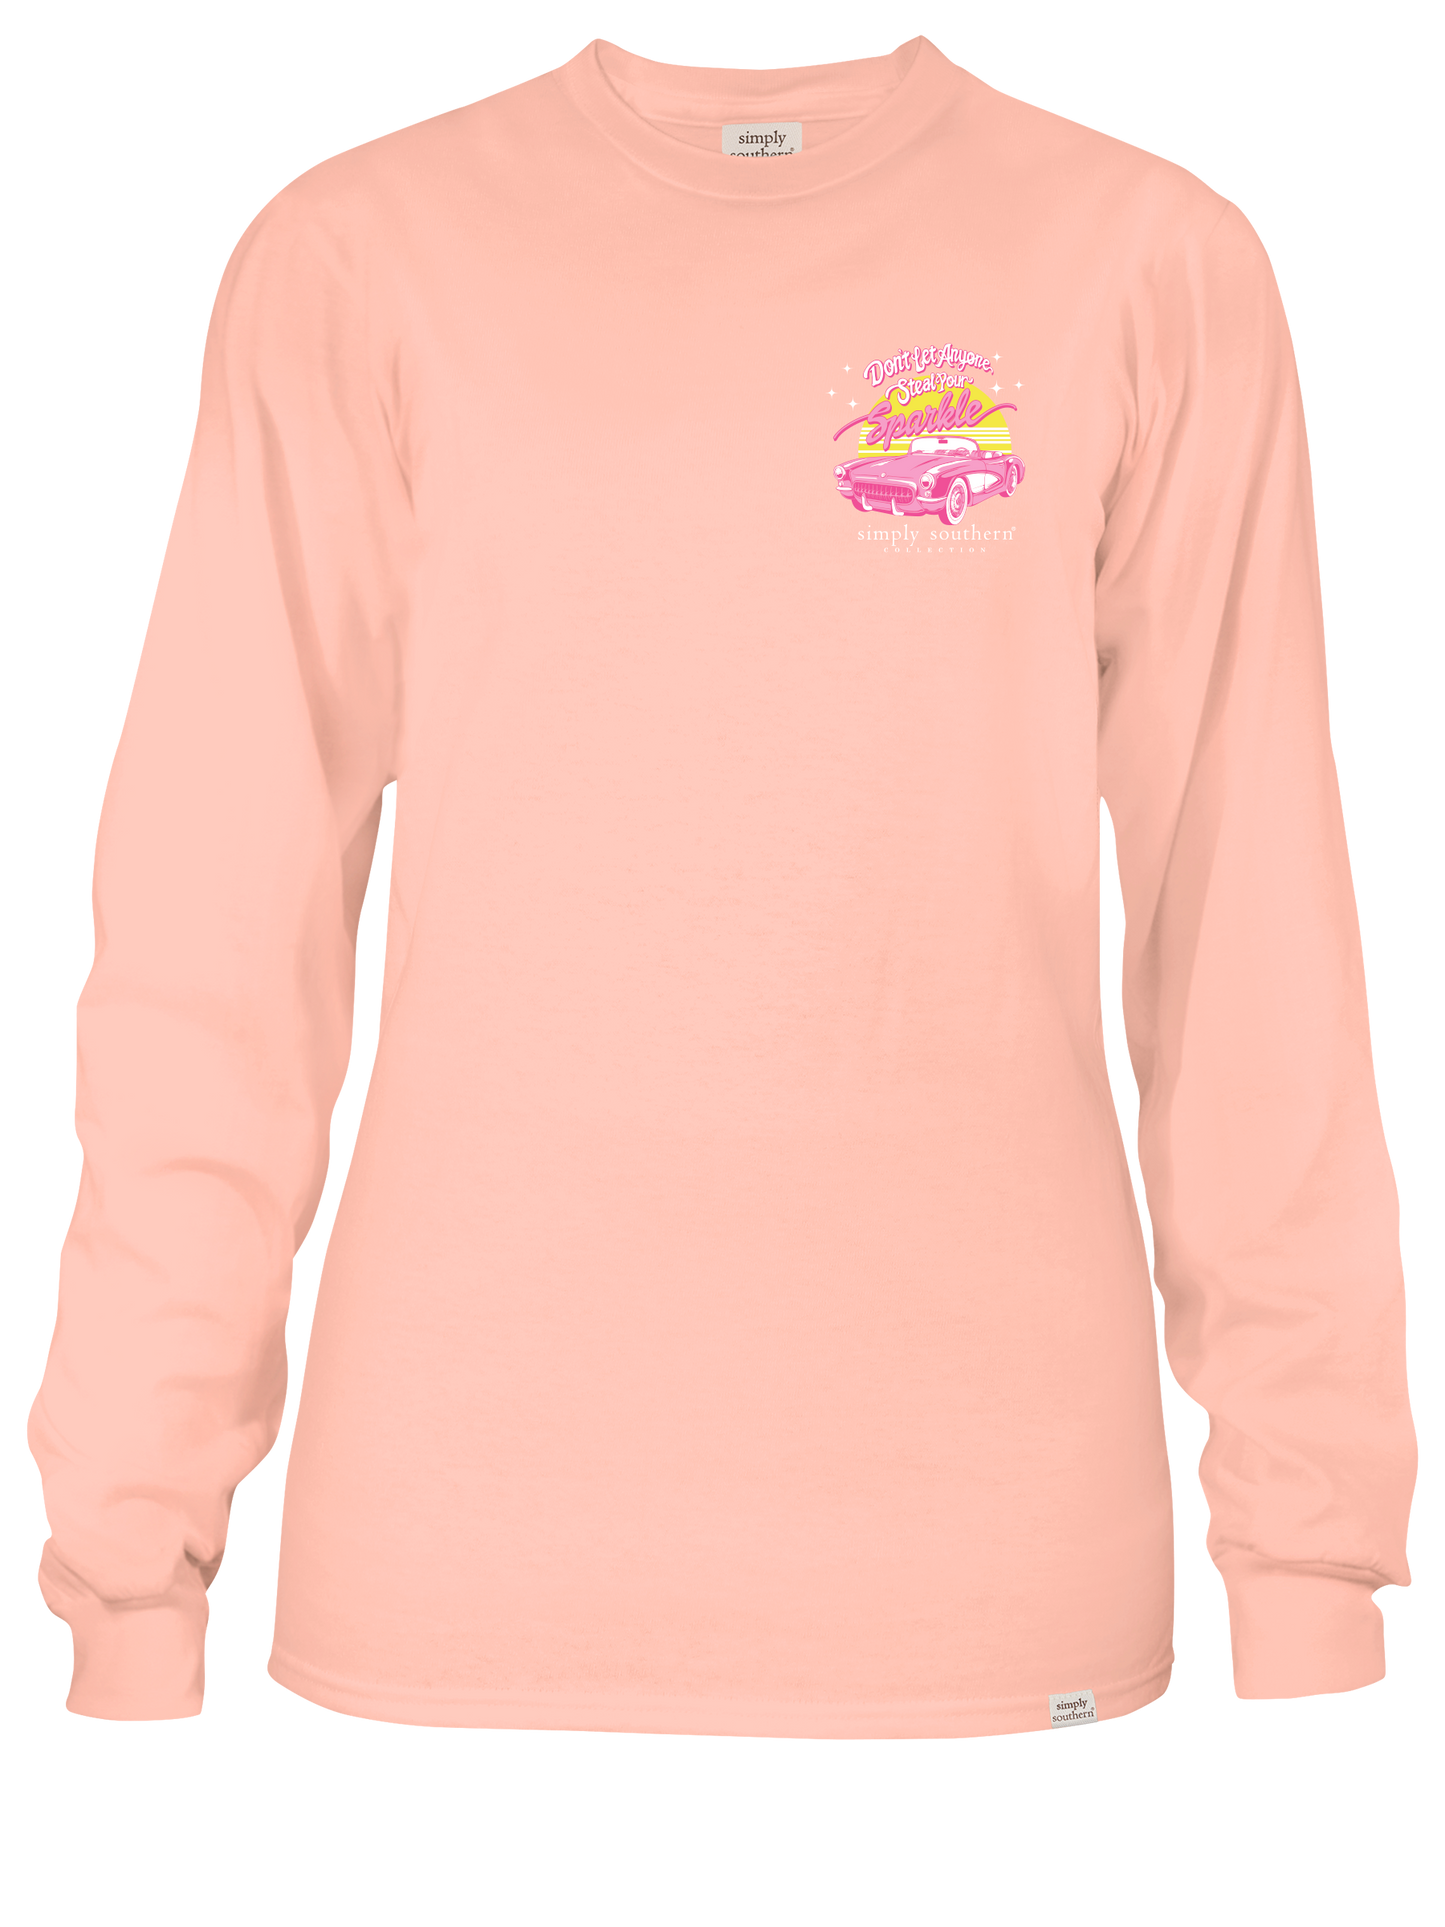 Girls Youth Sparkle Long Sleeve T-Shirt